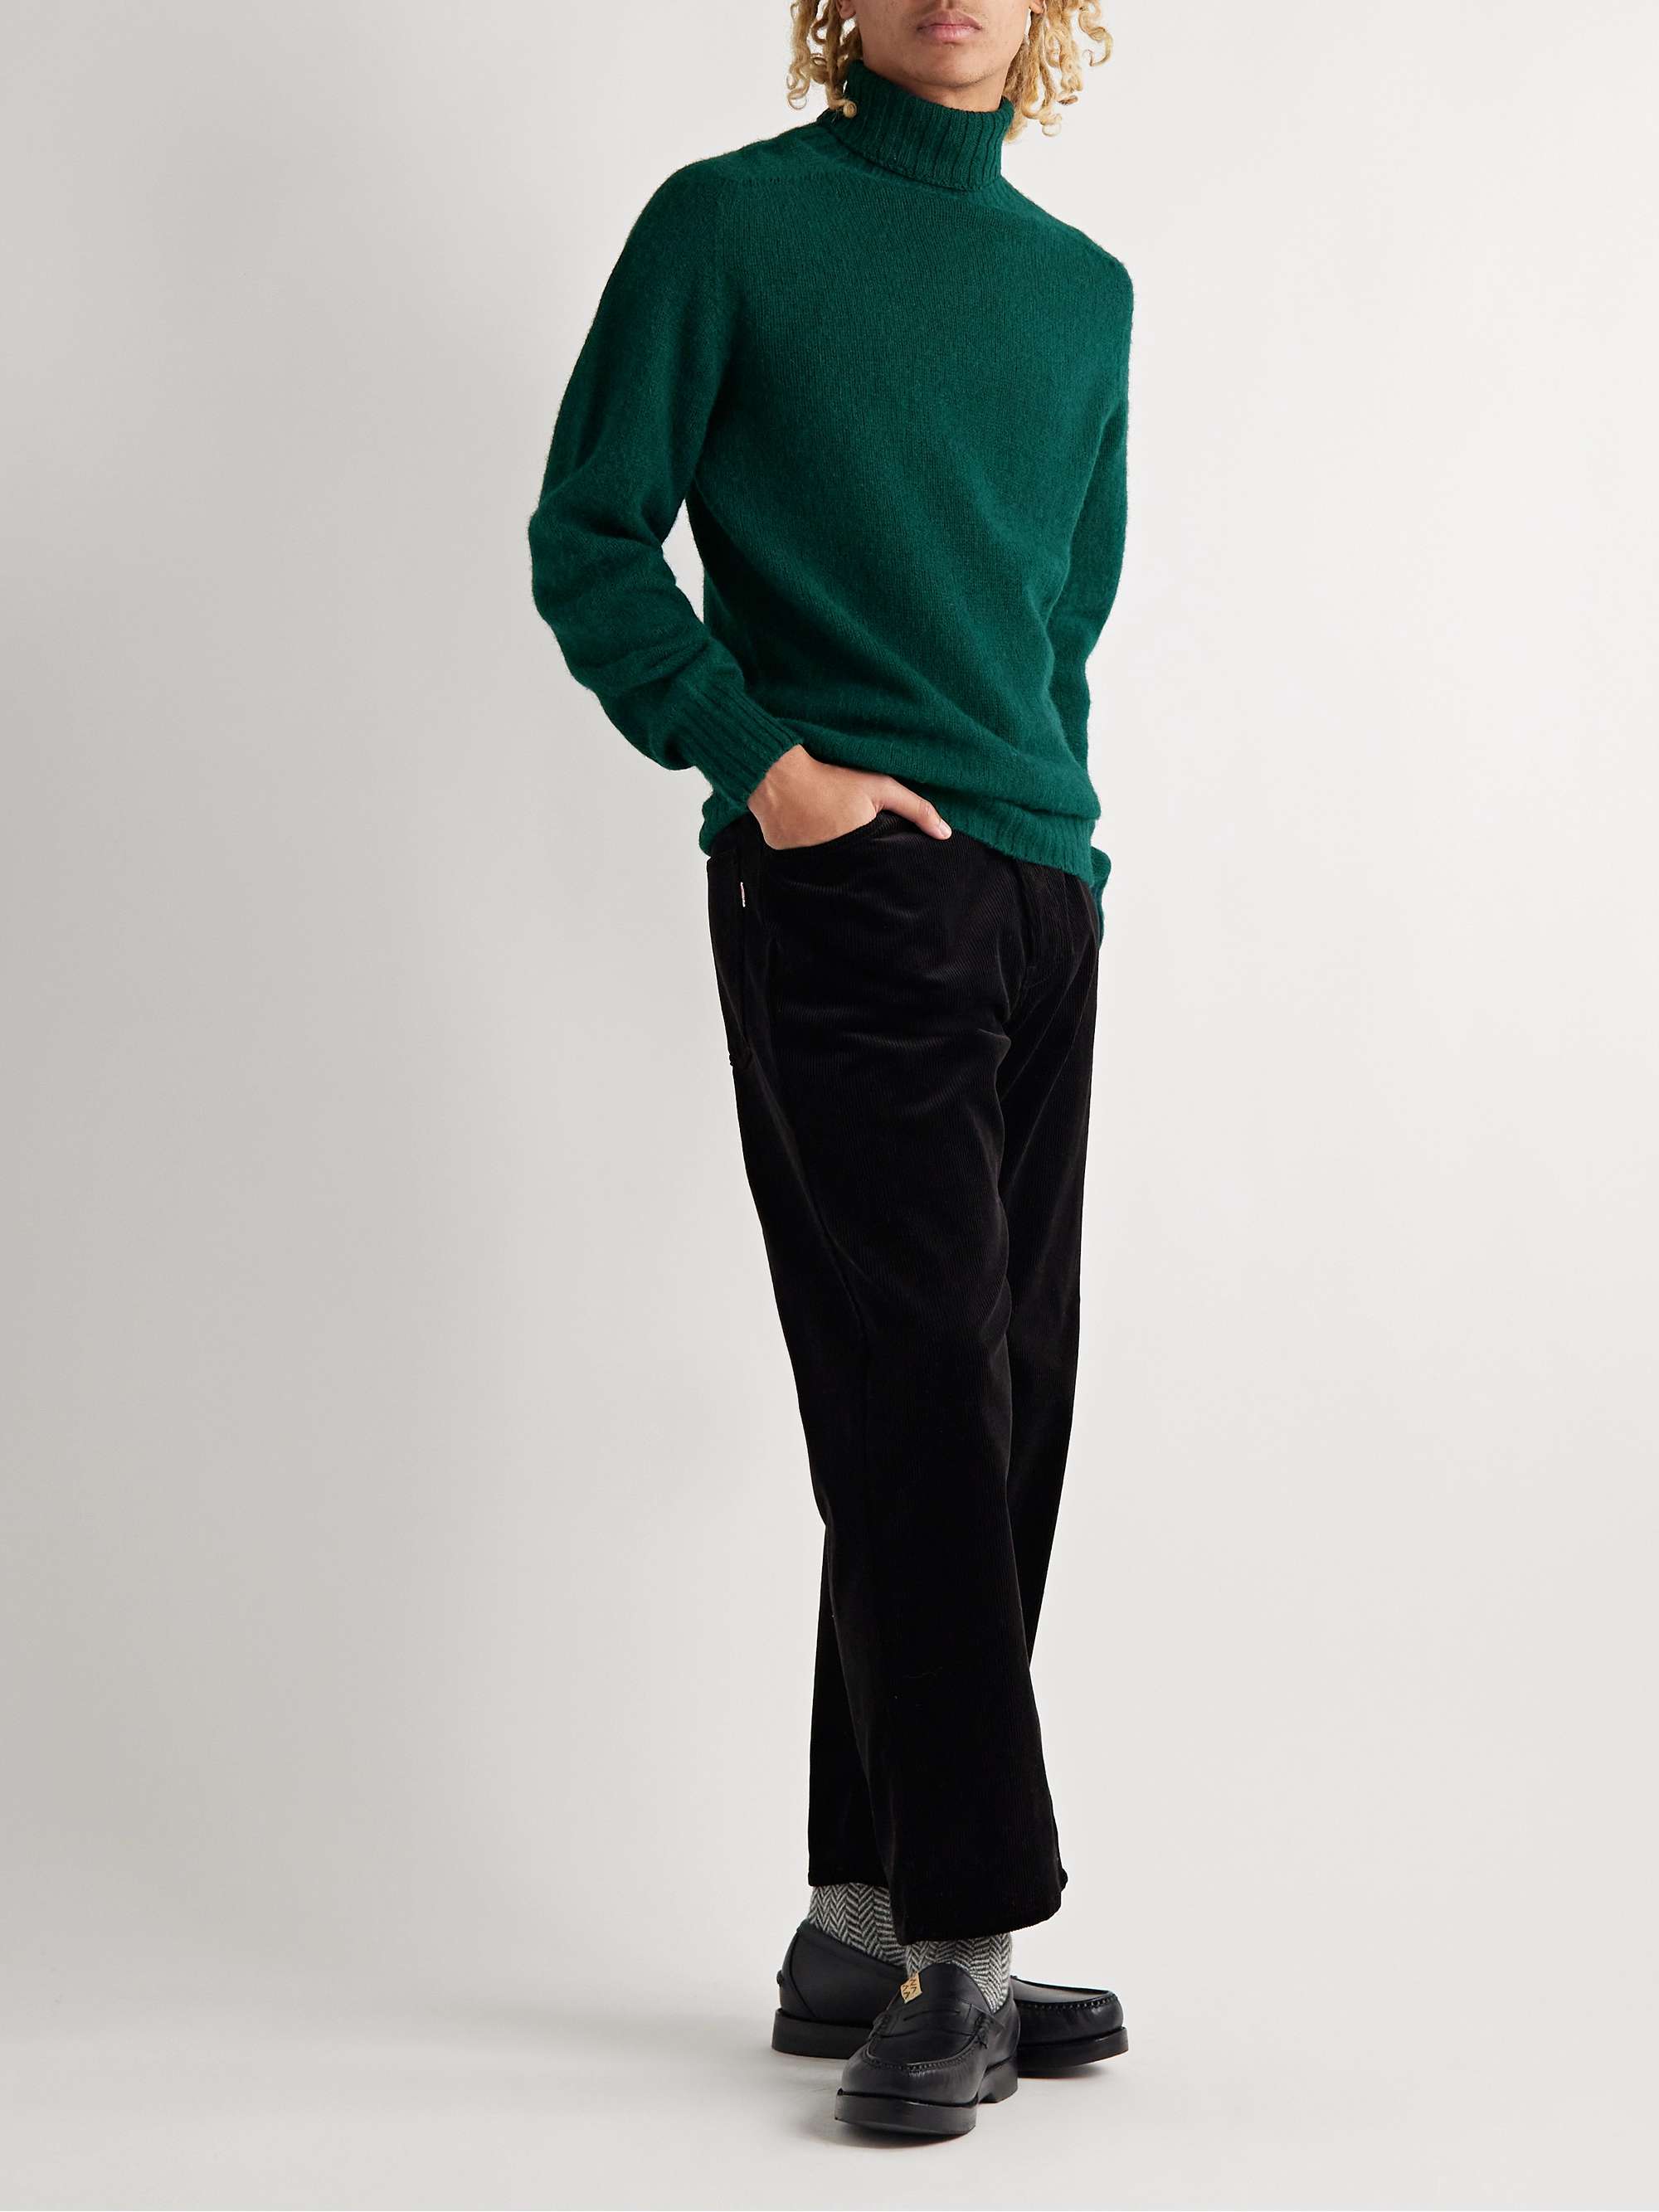 HOWLIN' Sylvester Slim-Fit Wool Rollneck Sweater